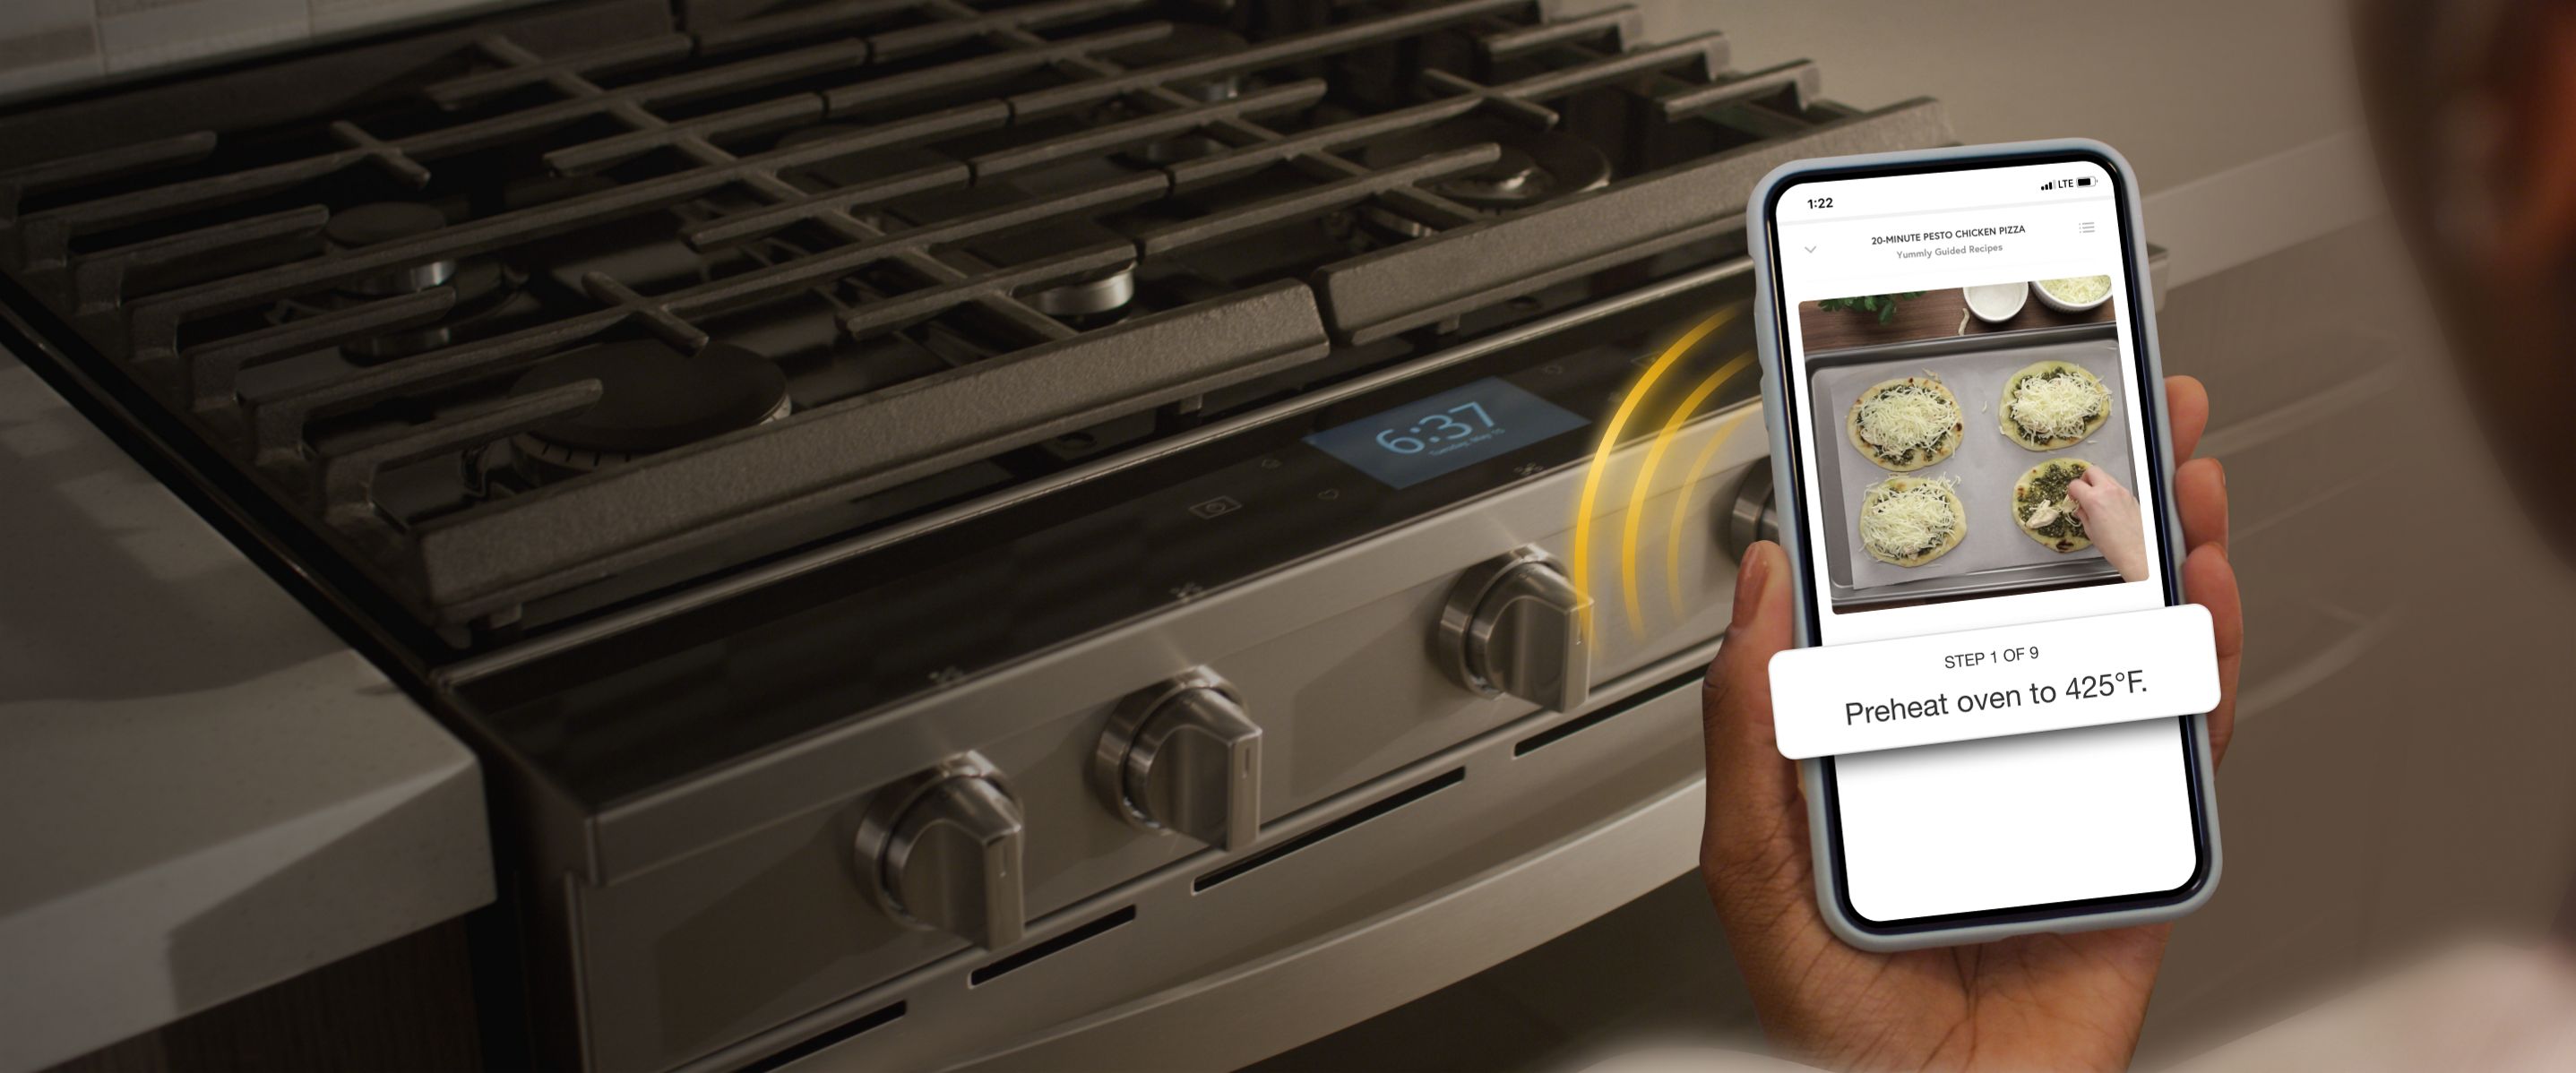 Whirlpool® Smart Range receiving cooking instructions from the Yummly® app